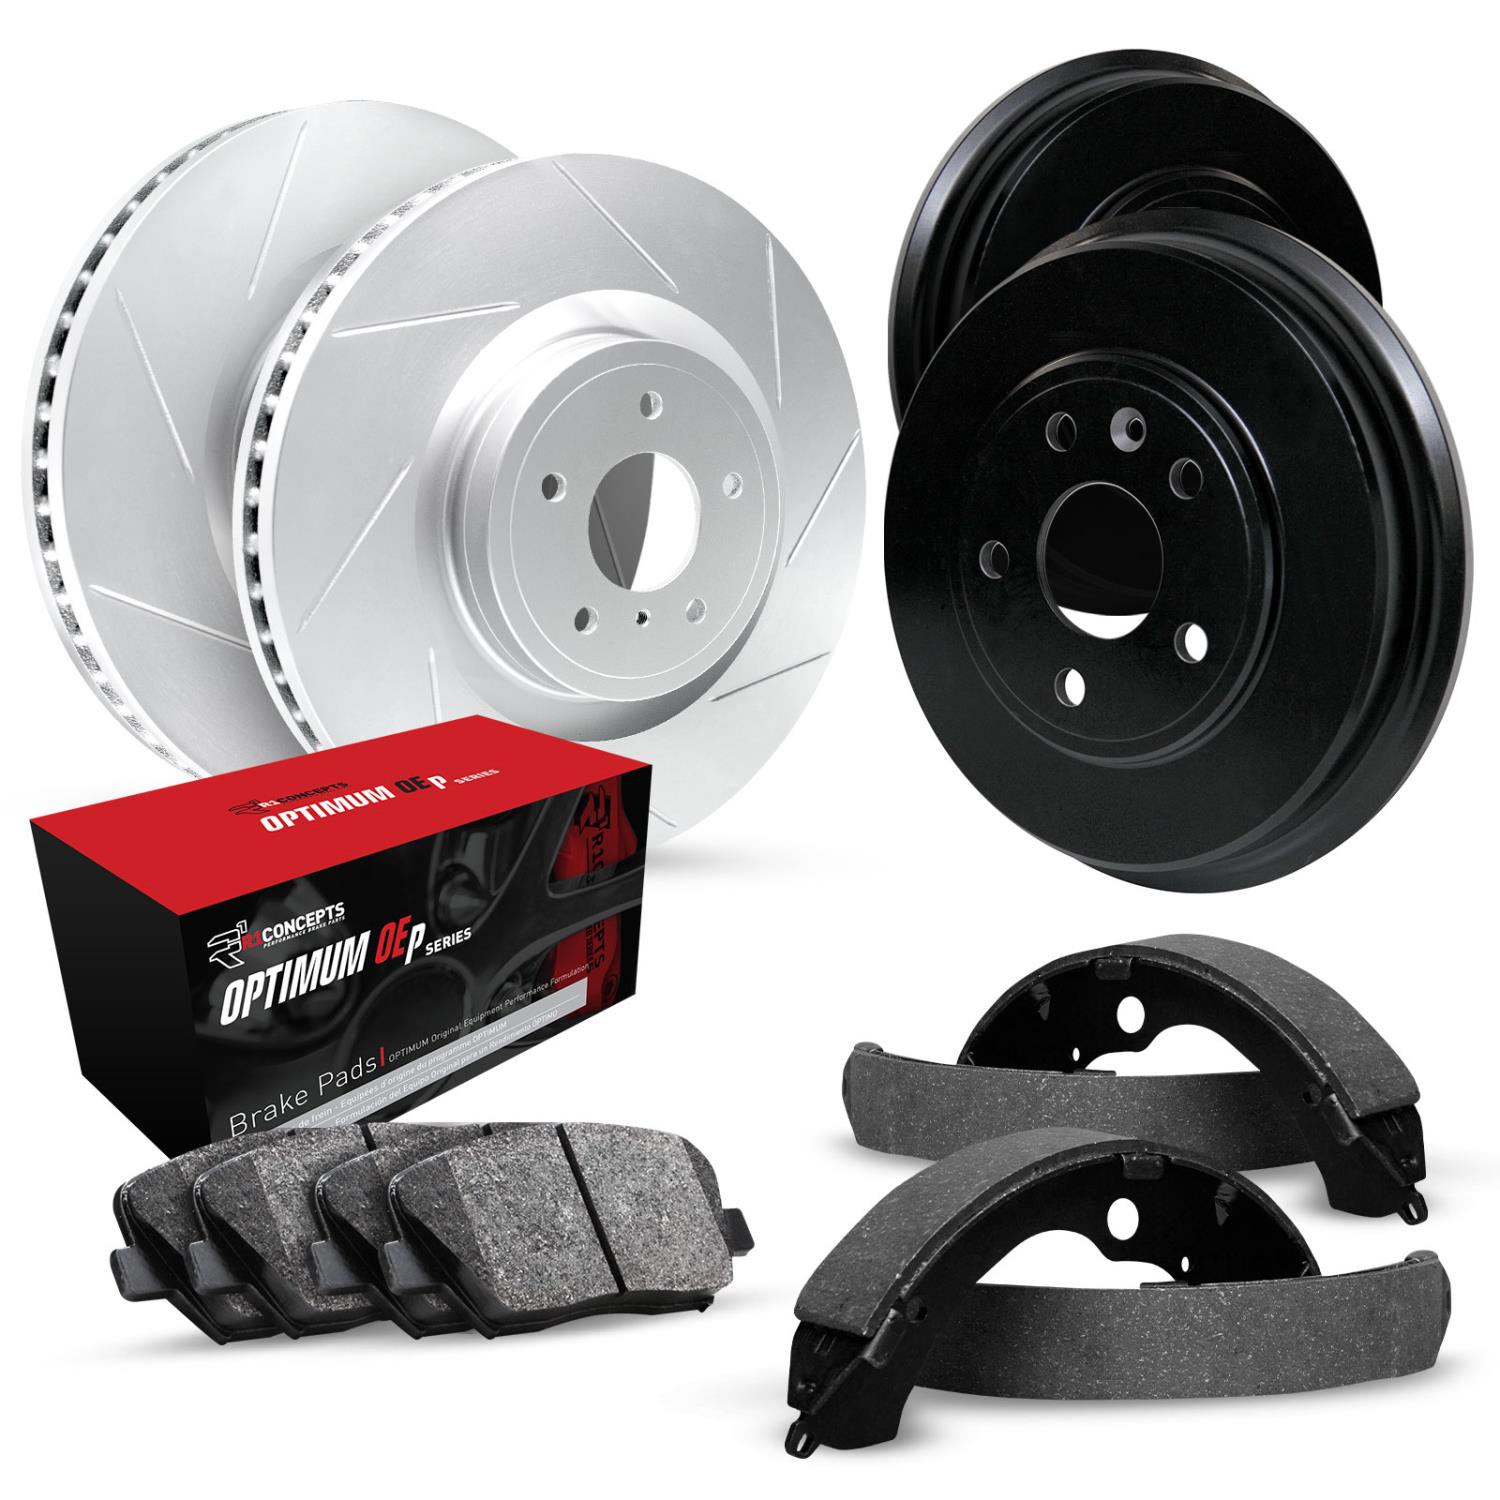 GEO-Carbon Slotted Brake Rotor & Drum Set w/Optimum OE Pads & Shoes, 1997-2005 GM, Position: Front & Rear